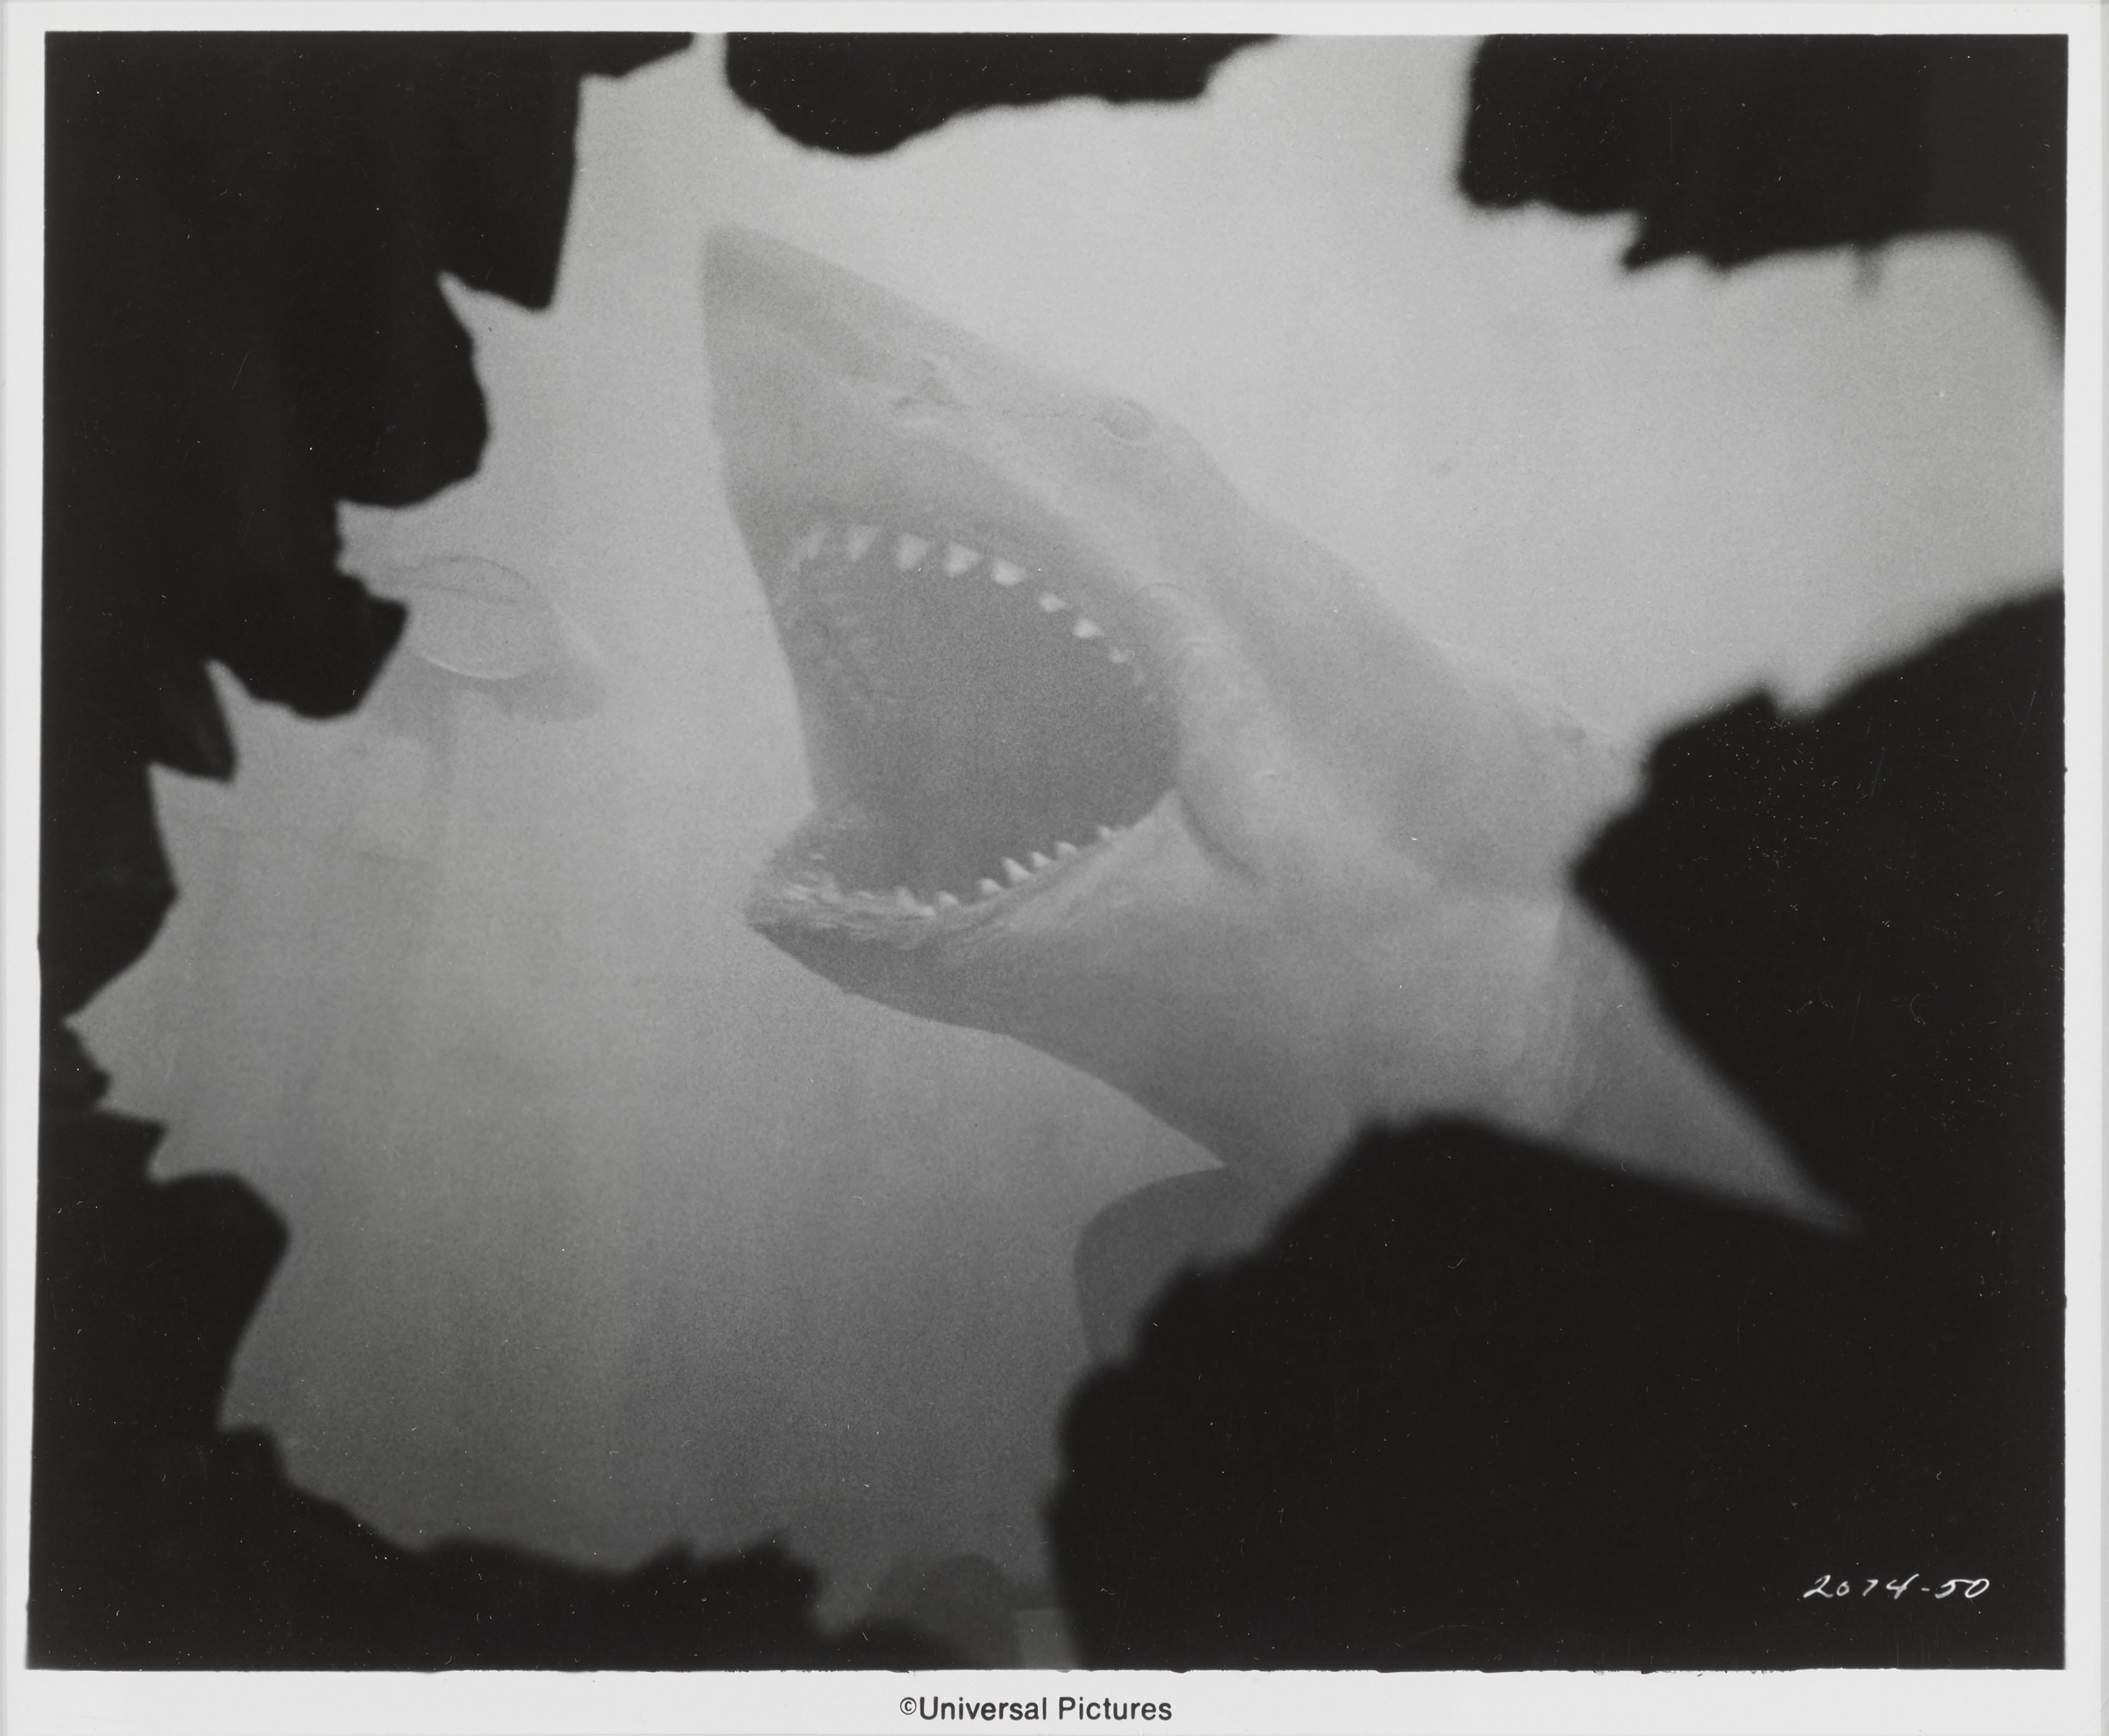 Original US black and white photographic production still for the classic 1975 film The Jaws.
This still was sent out to newspapers to advertise the re-release.
The film was directed by Steven Spielberg and starred Roy Scheider, Richard Dreyfuss and